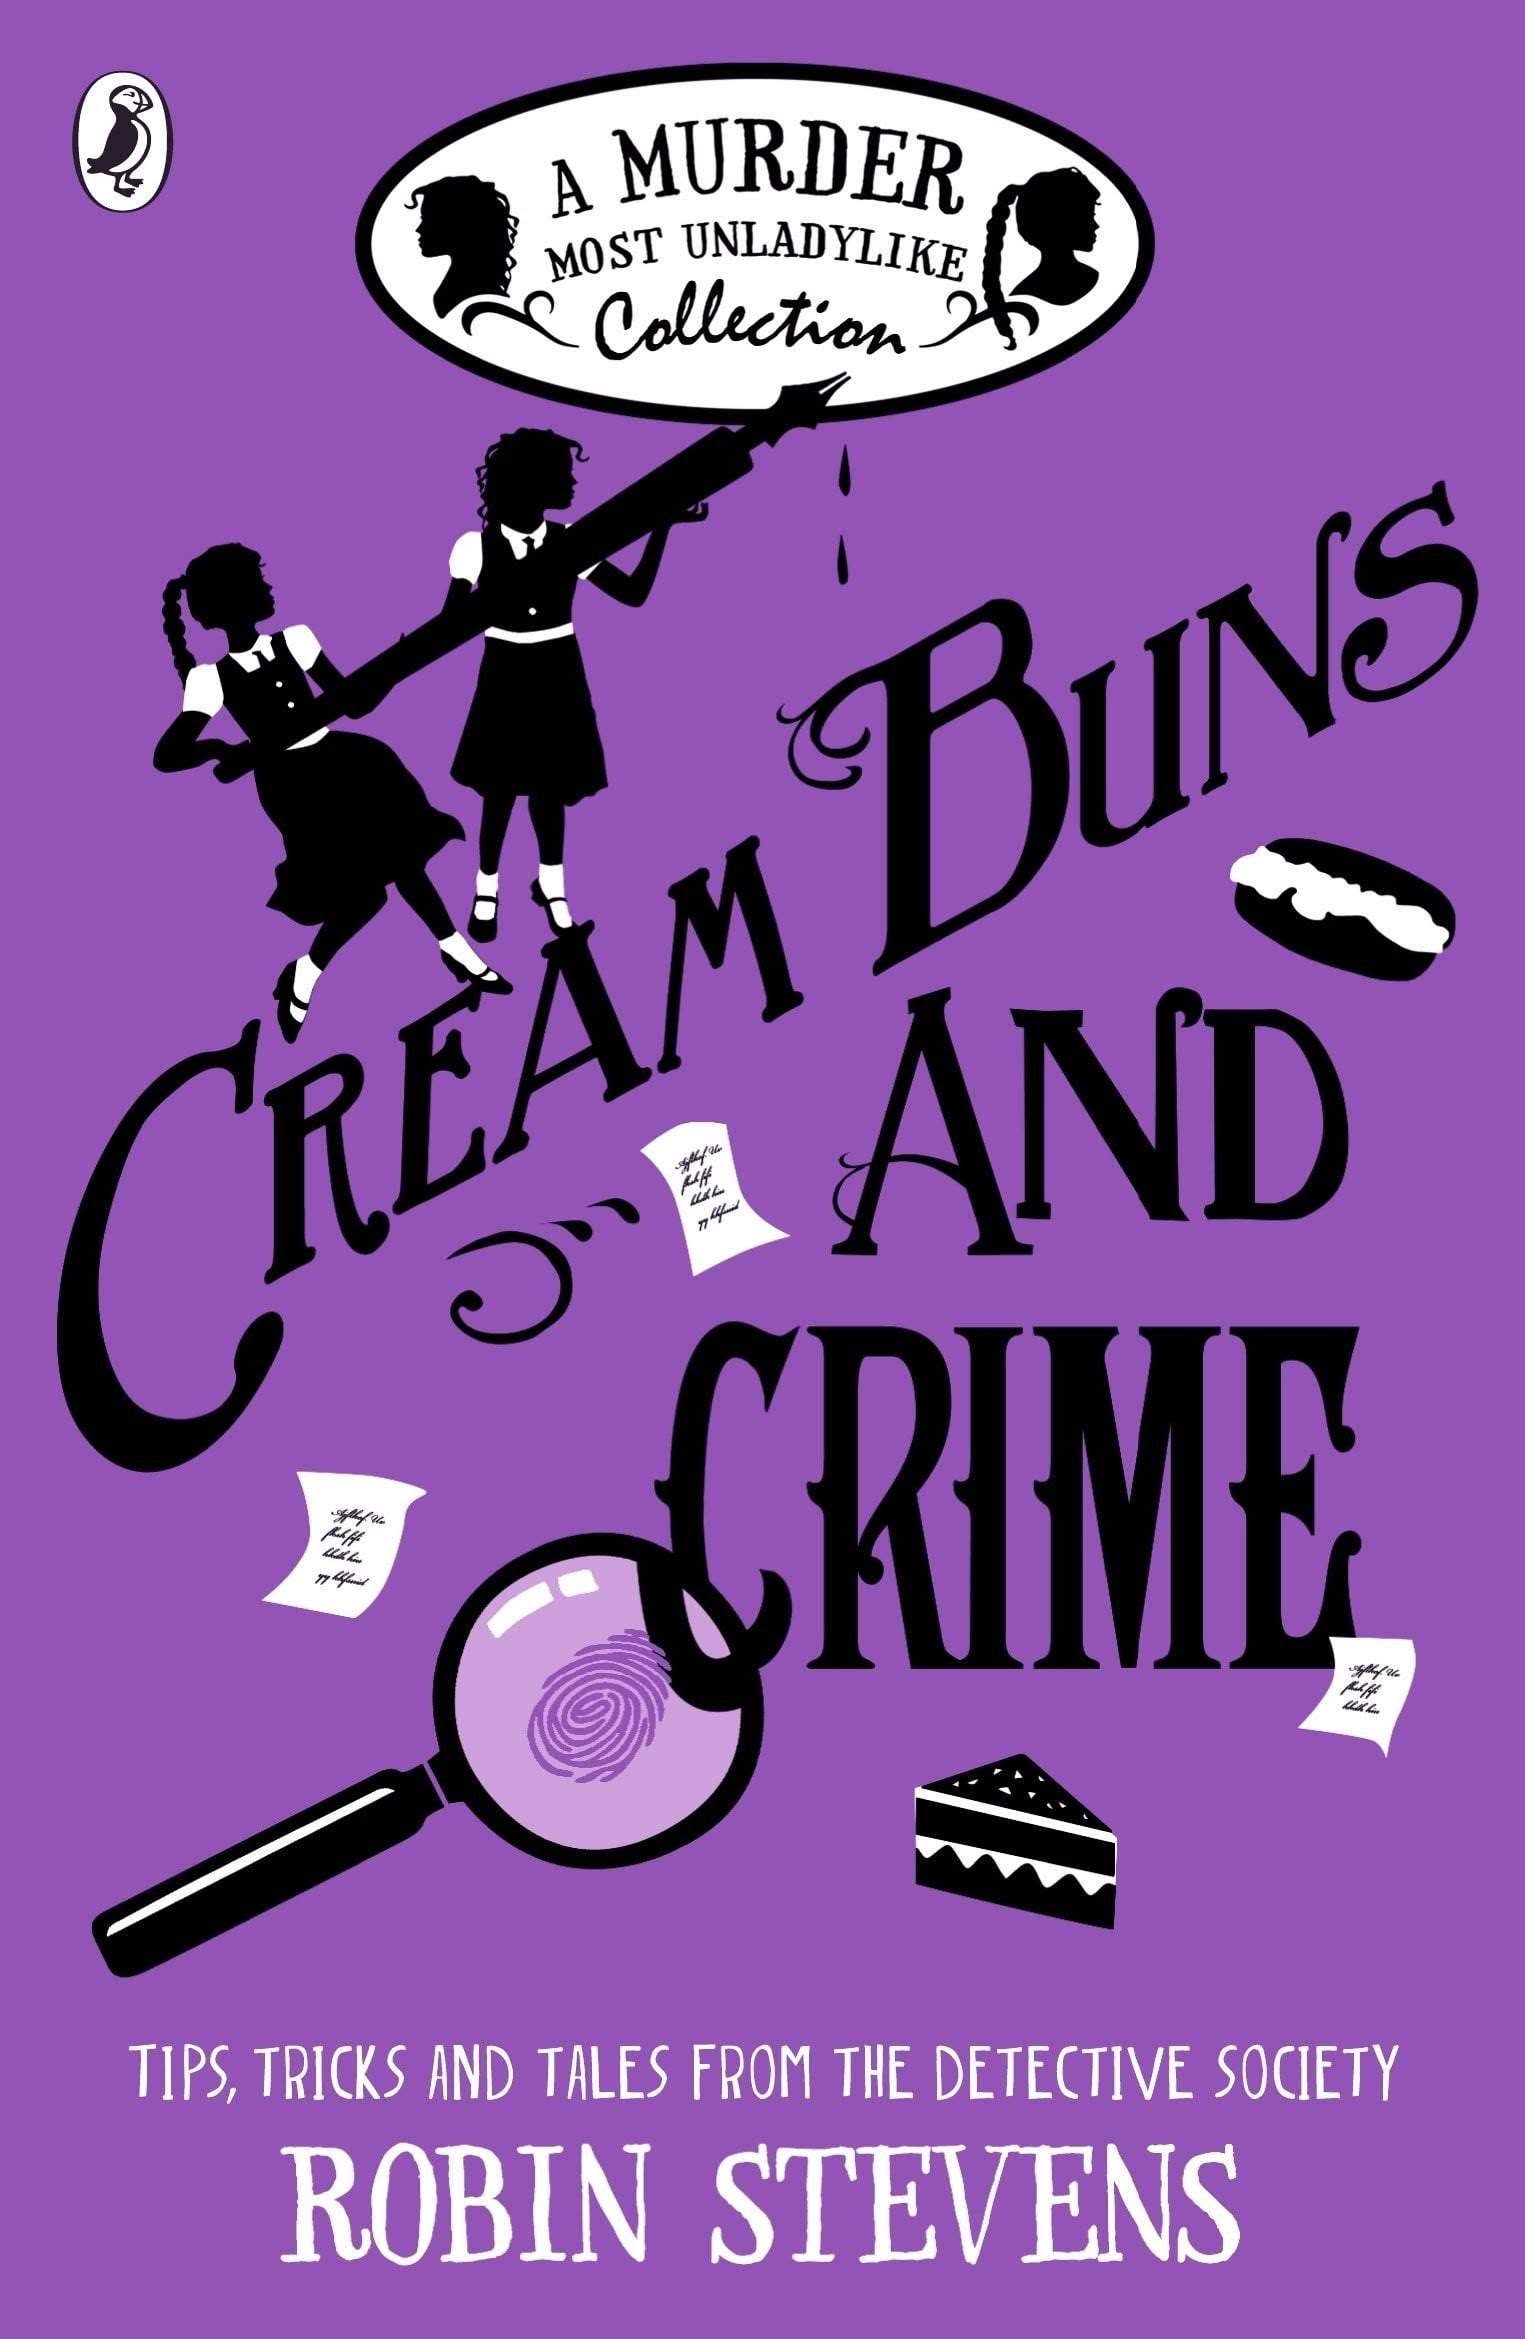 Cream Buns and Crime: A Murder Most Unladylike Collection - Robin Stevens